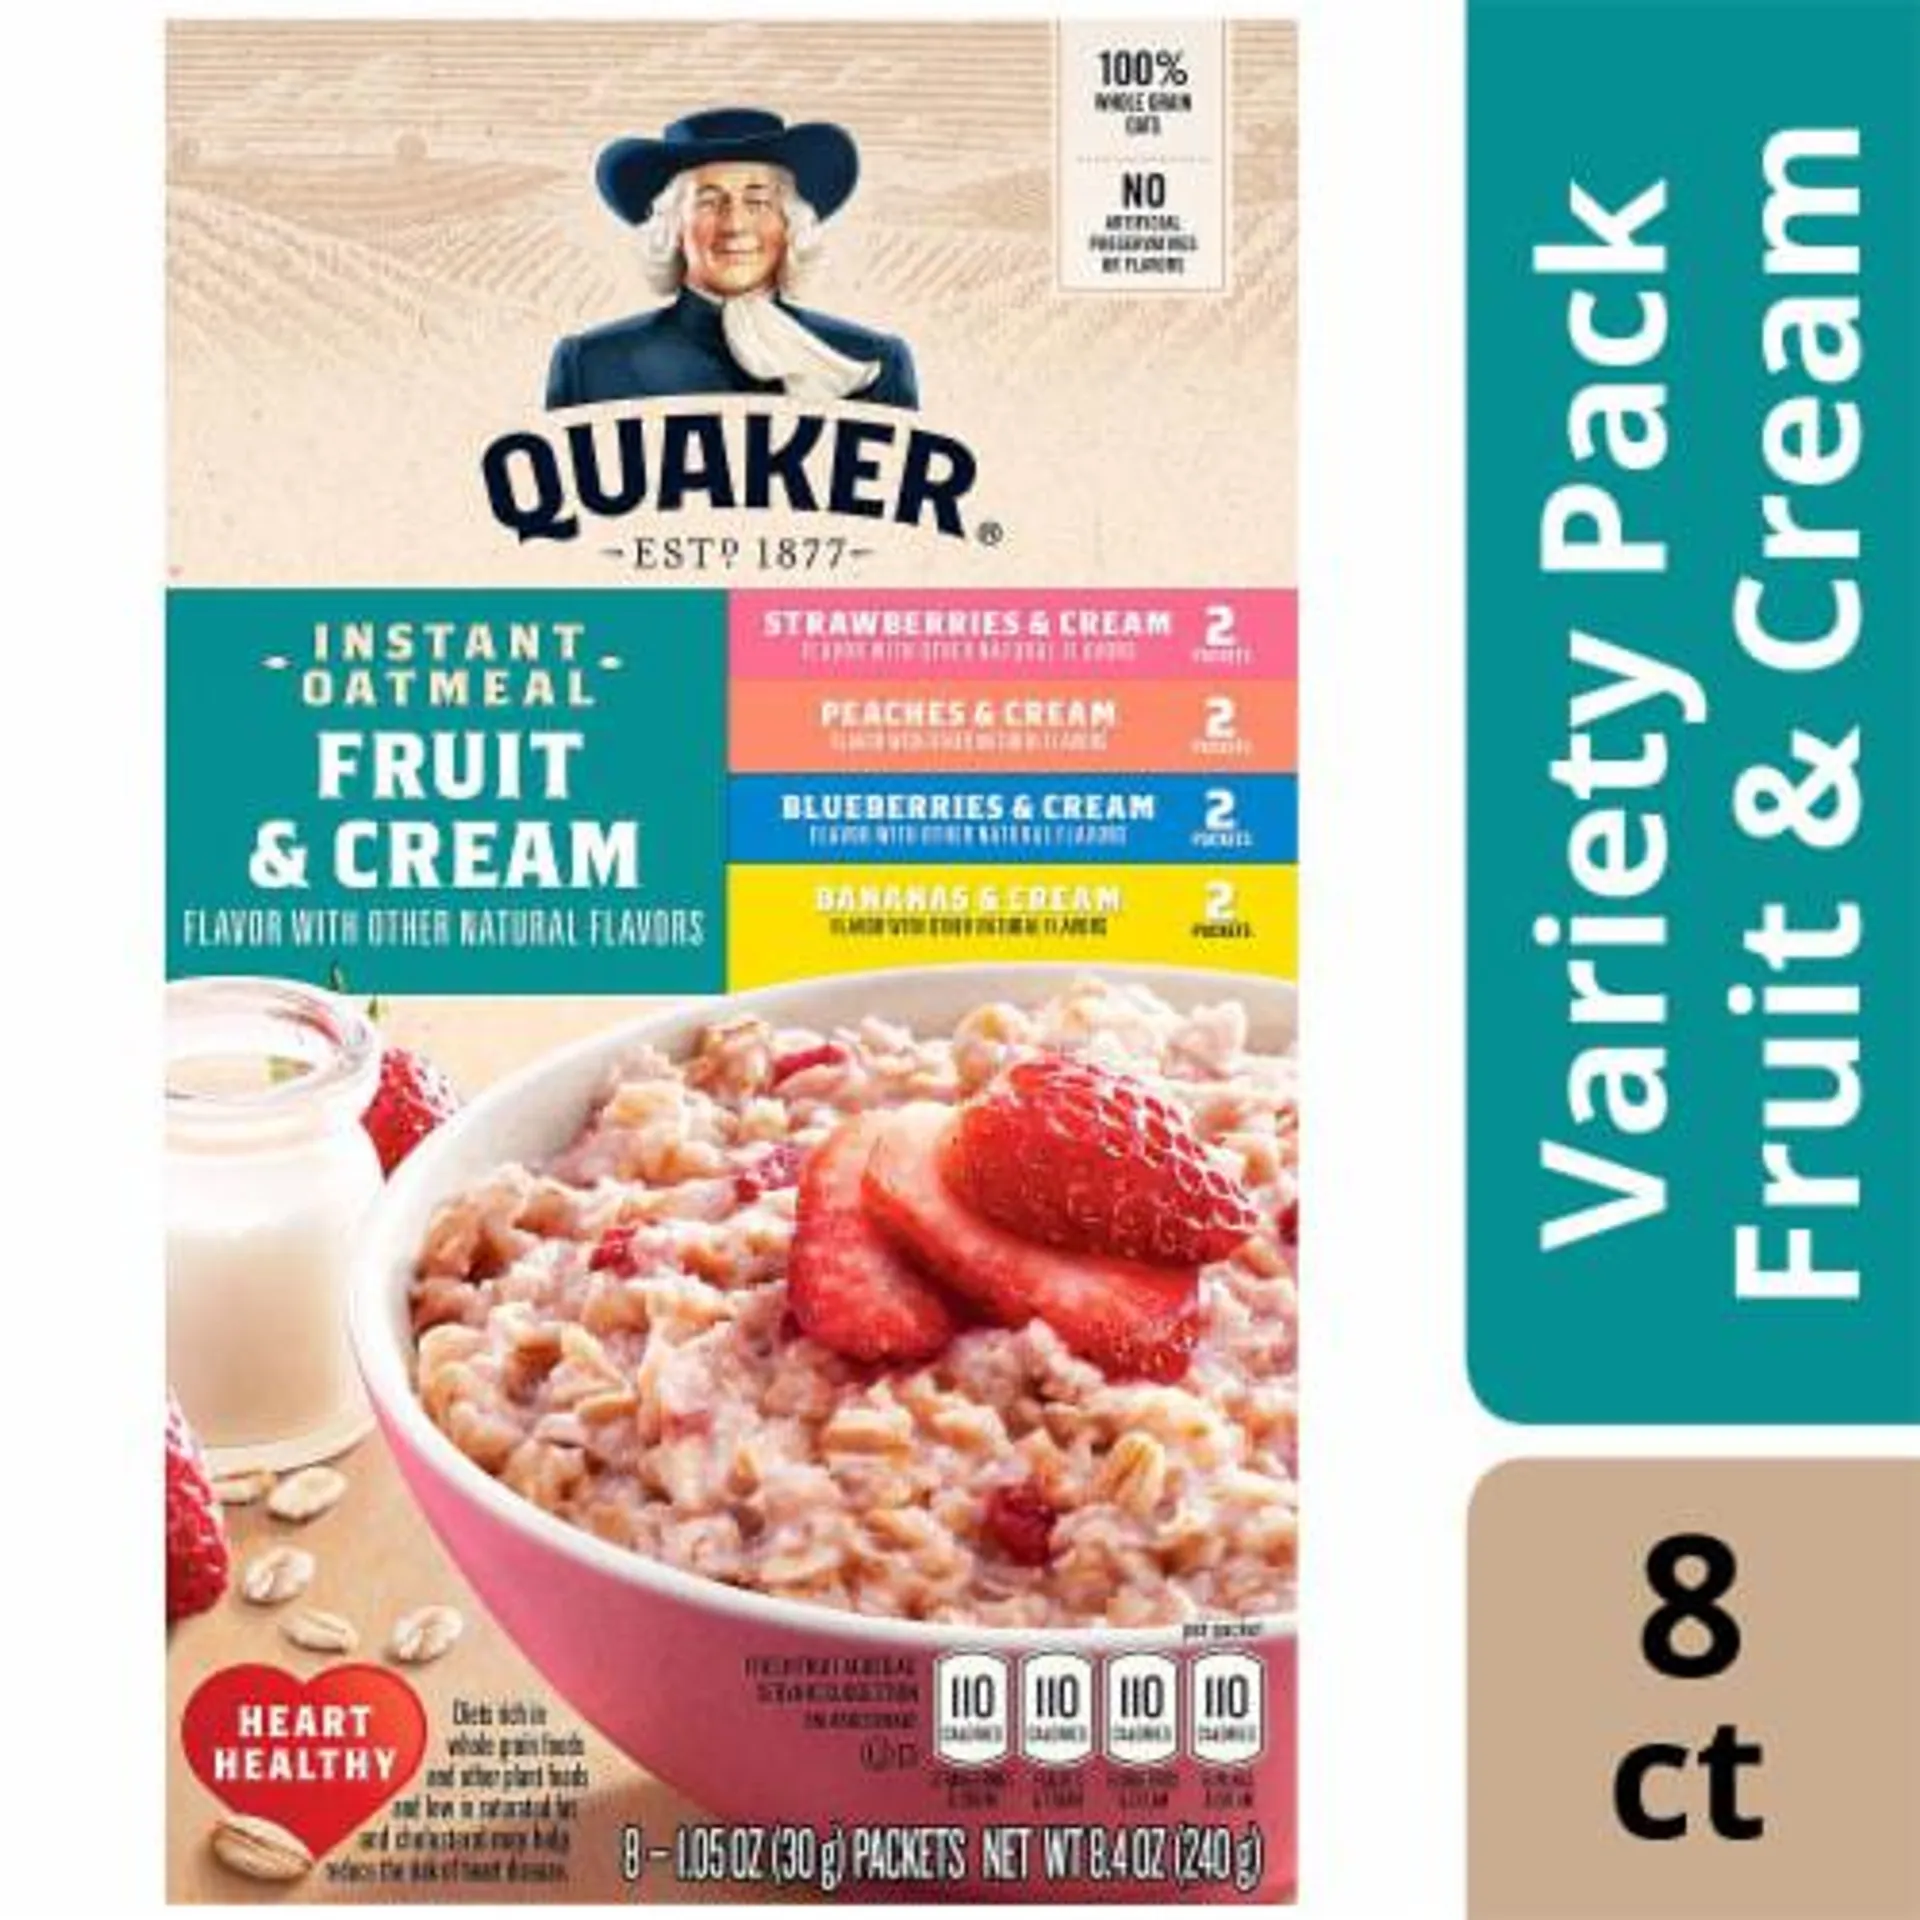 Quaker Fruit and Cream Instant Oatmeal Breakfast Variety Pack